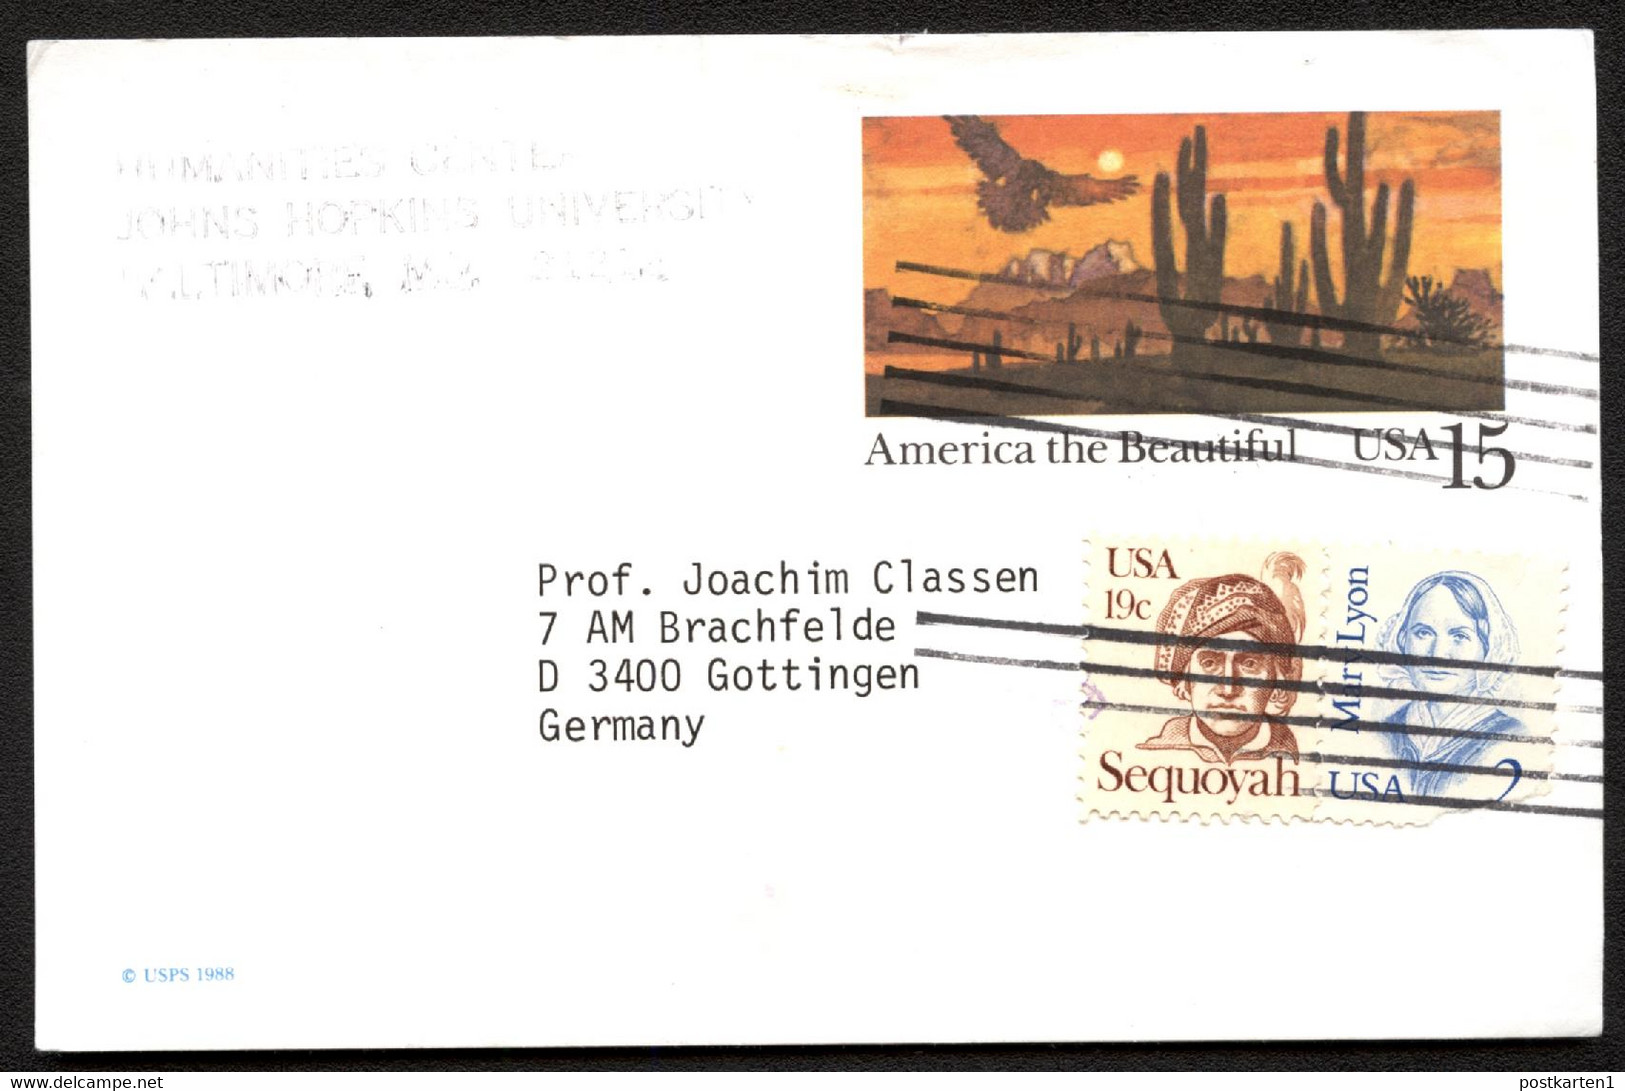 USA UX127 Postal Card Non-philatelic Usage Baltimore MD To GERMANY 1991 - 1981-00